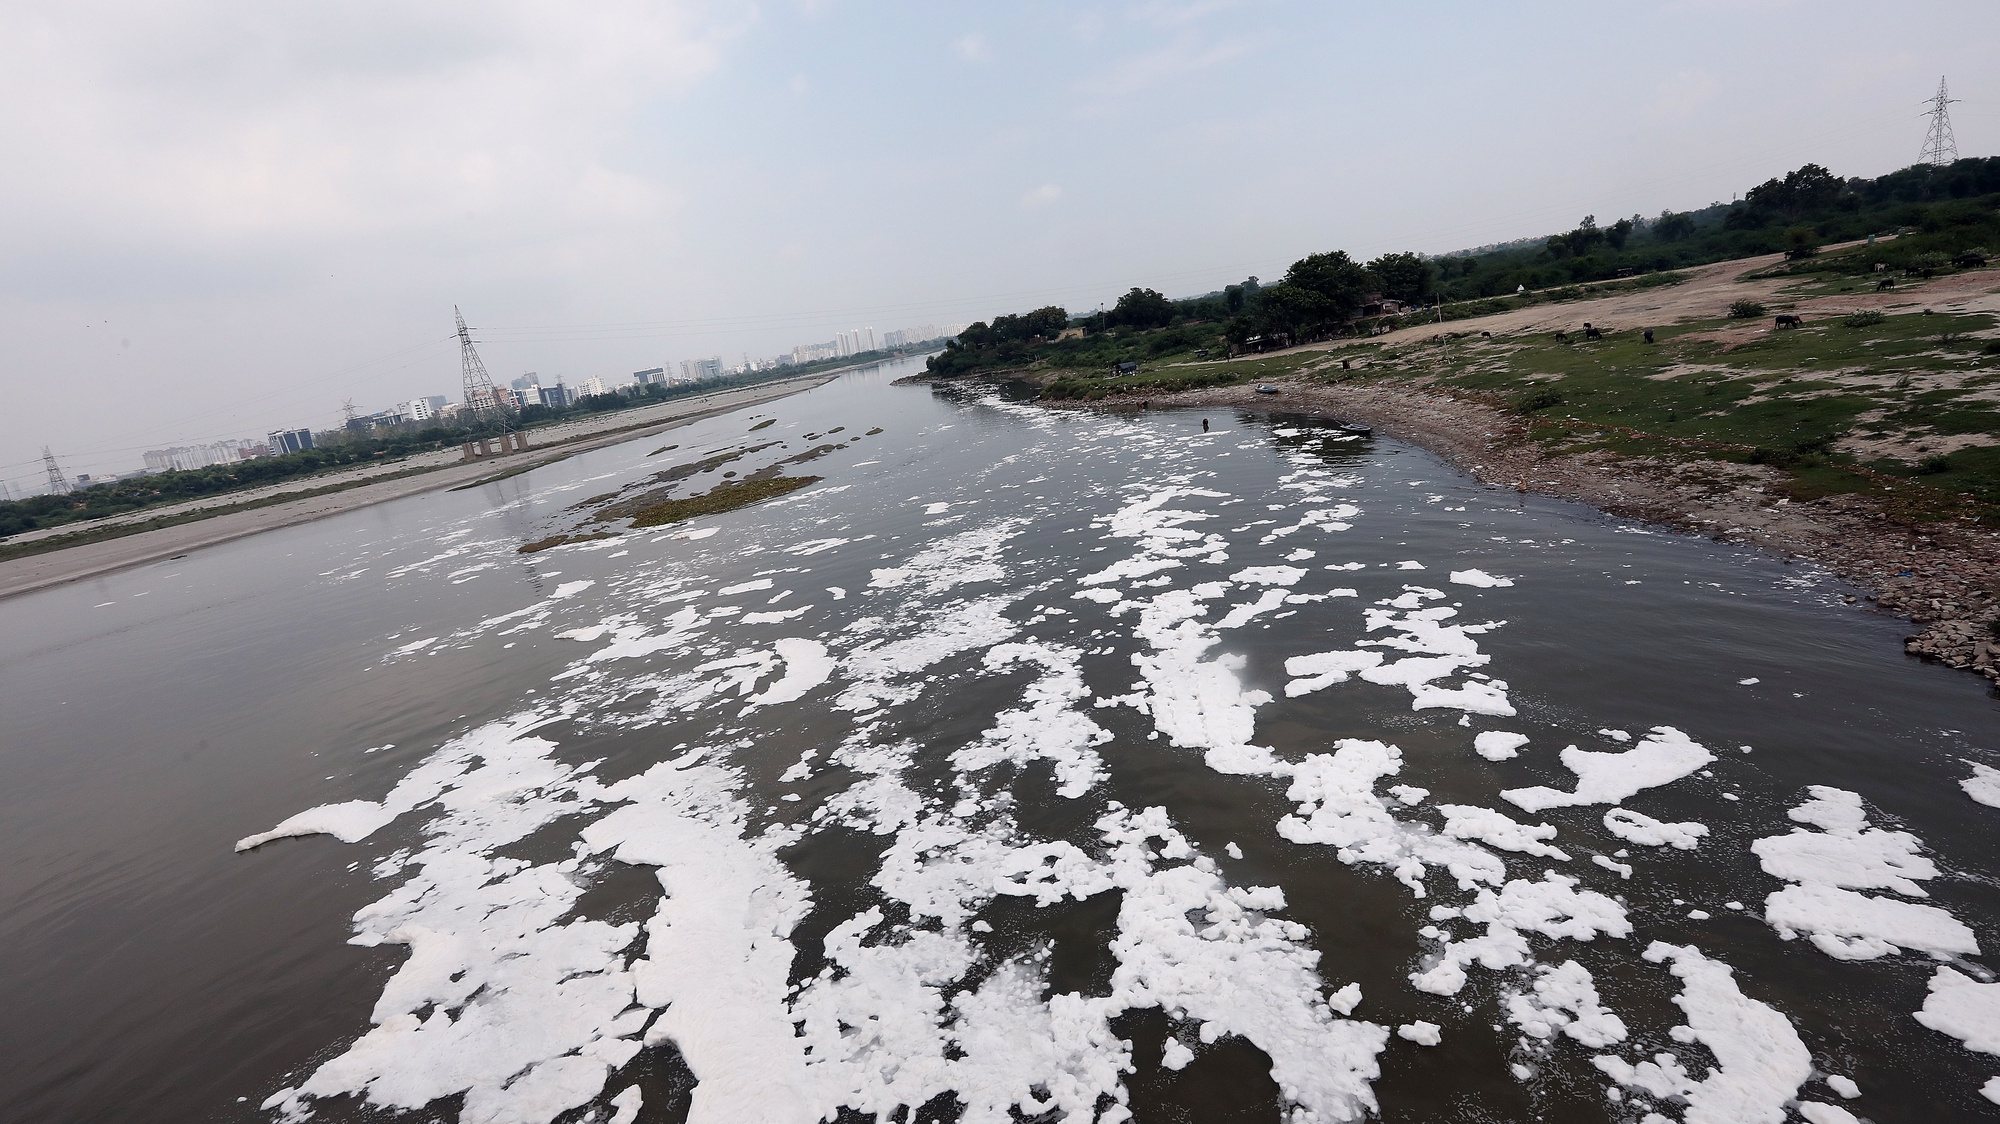 epa08589741 A general view of polluted Yamuna river that is covered with toxic foam caused by industrial waste in New Delhi, India, 07 August 2020. According to the news reports pollution returns to the river Yamuna after governments allowed relaxation in two months lockdown that was for prevent the spread of coronavirus and Covid 19.  EPA/HARISH TYAGI